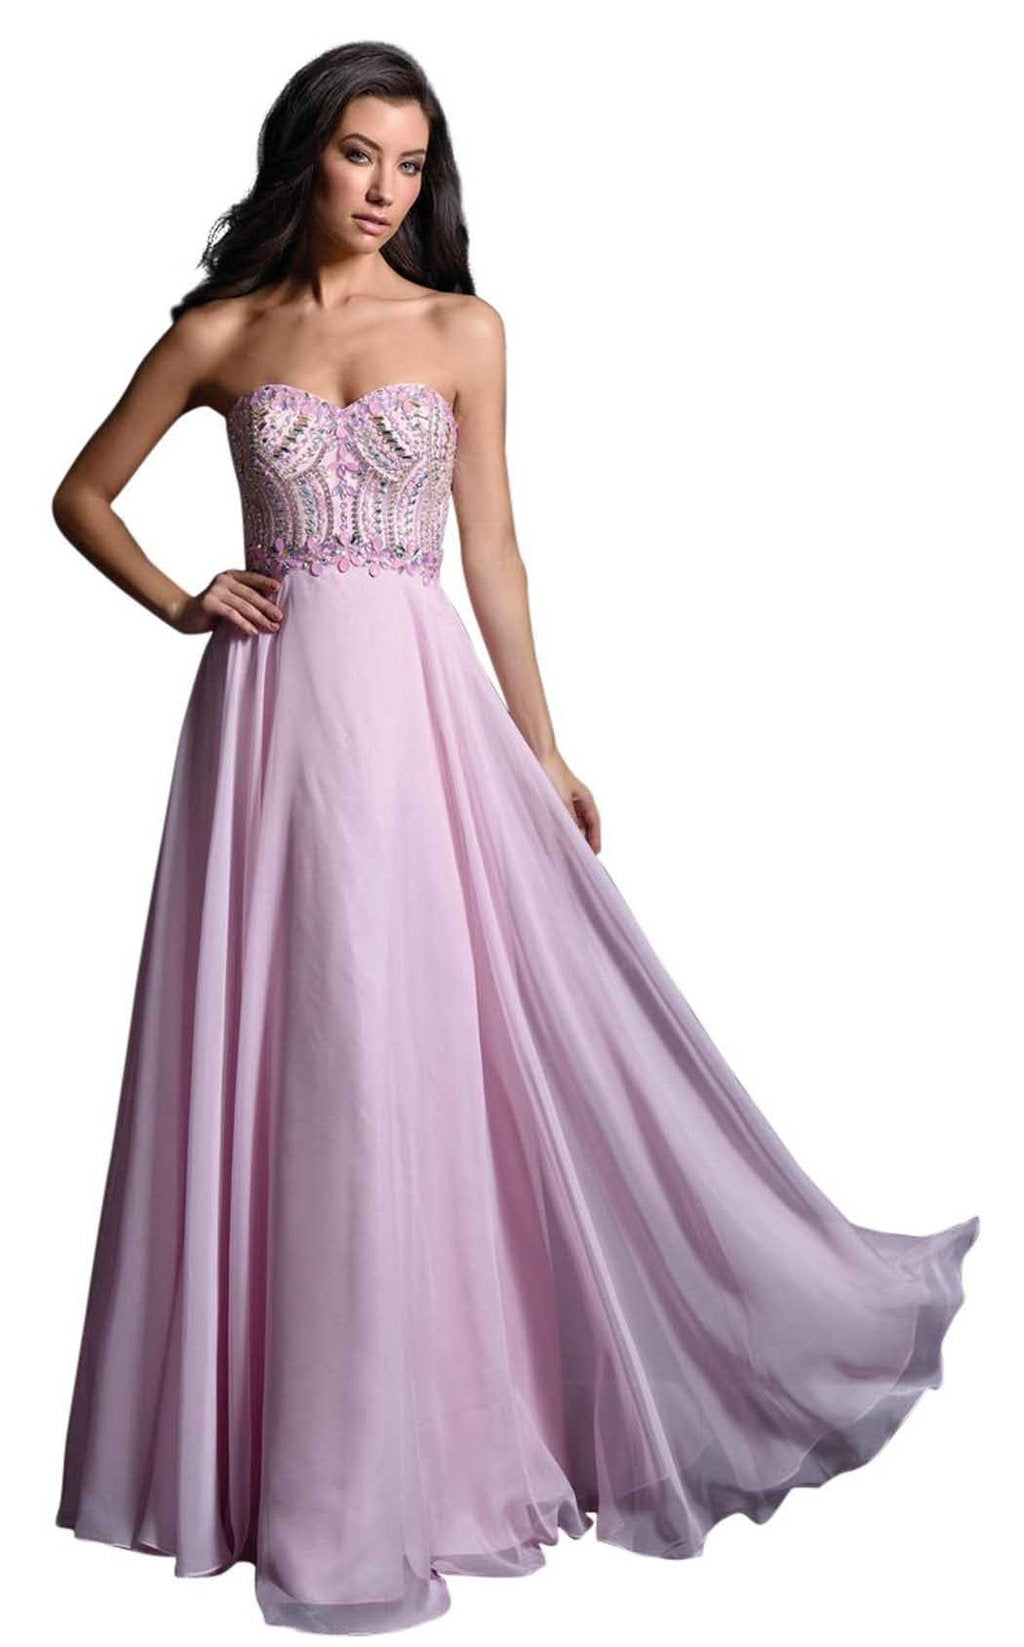 Nina Canacci 1260 Size 2 Long A Line Strapless Pink Prom Dress Embellished Top